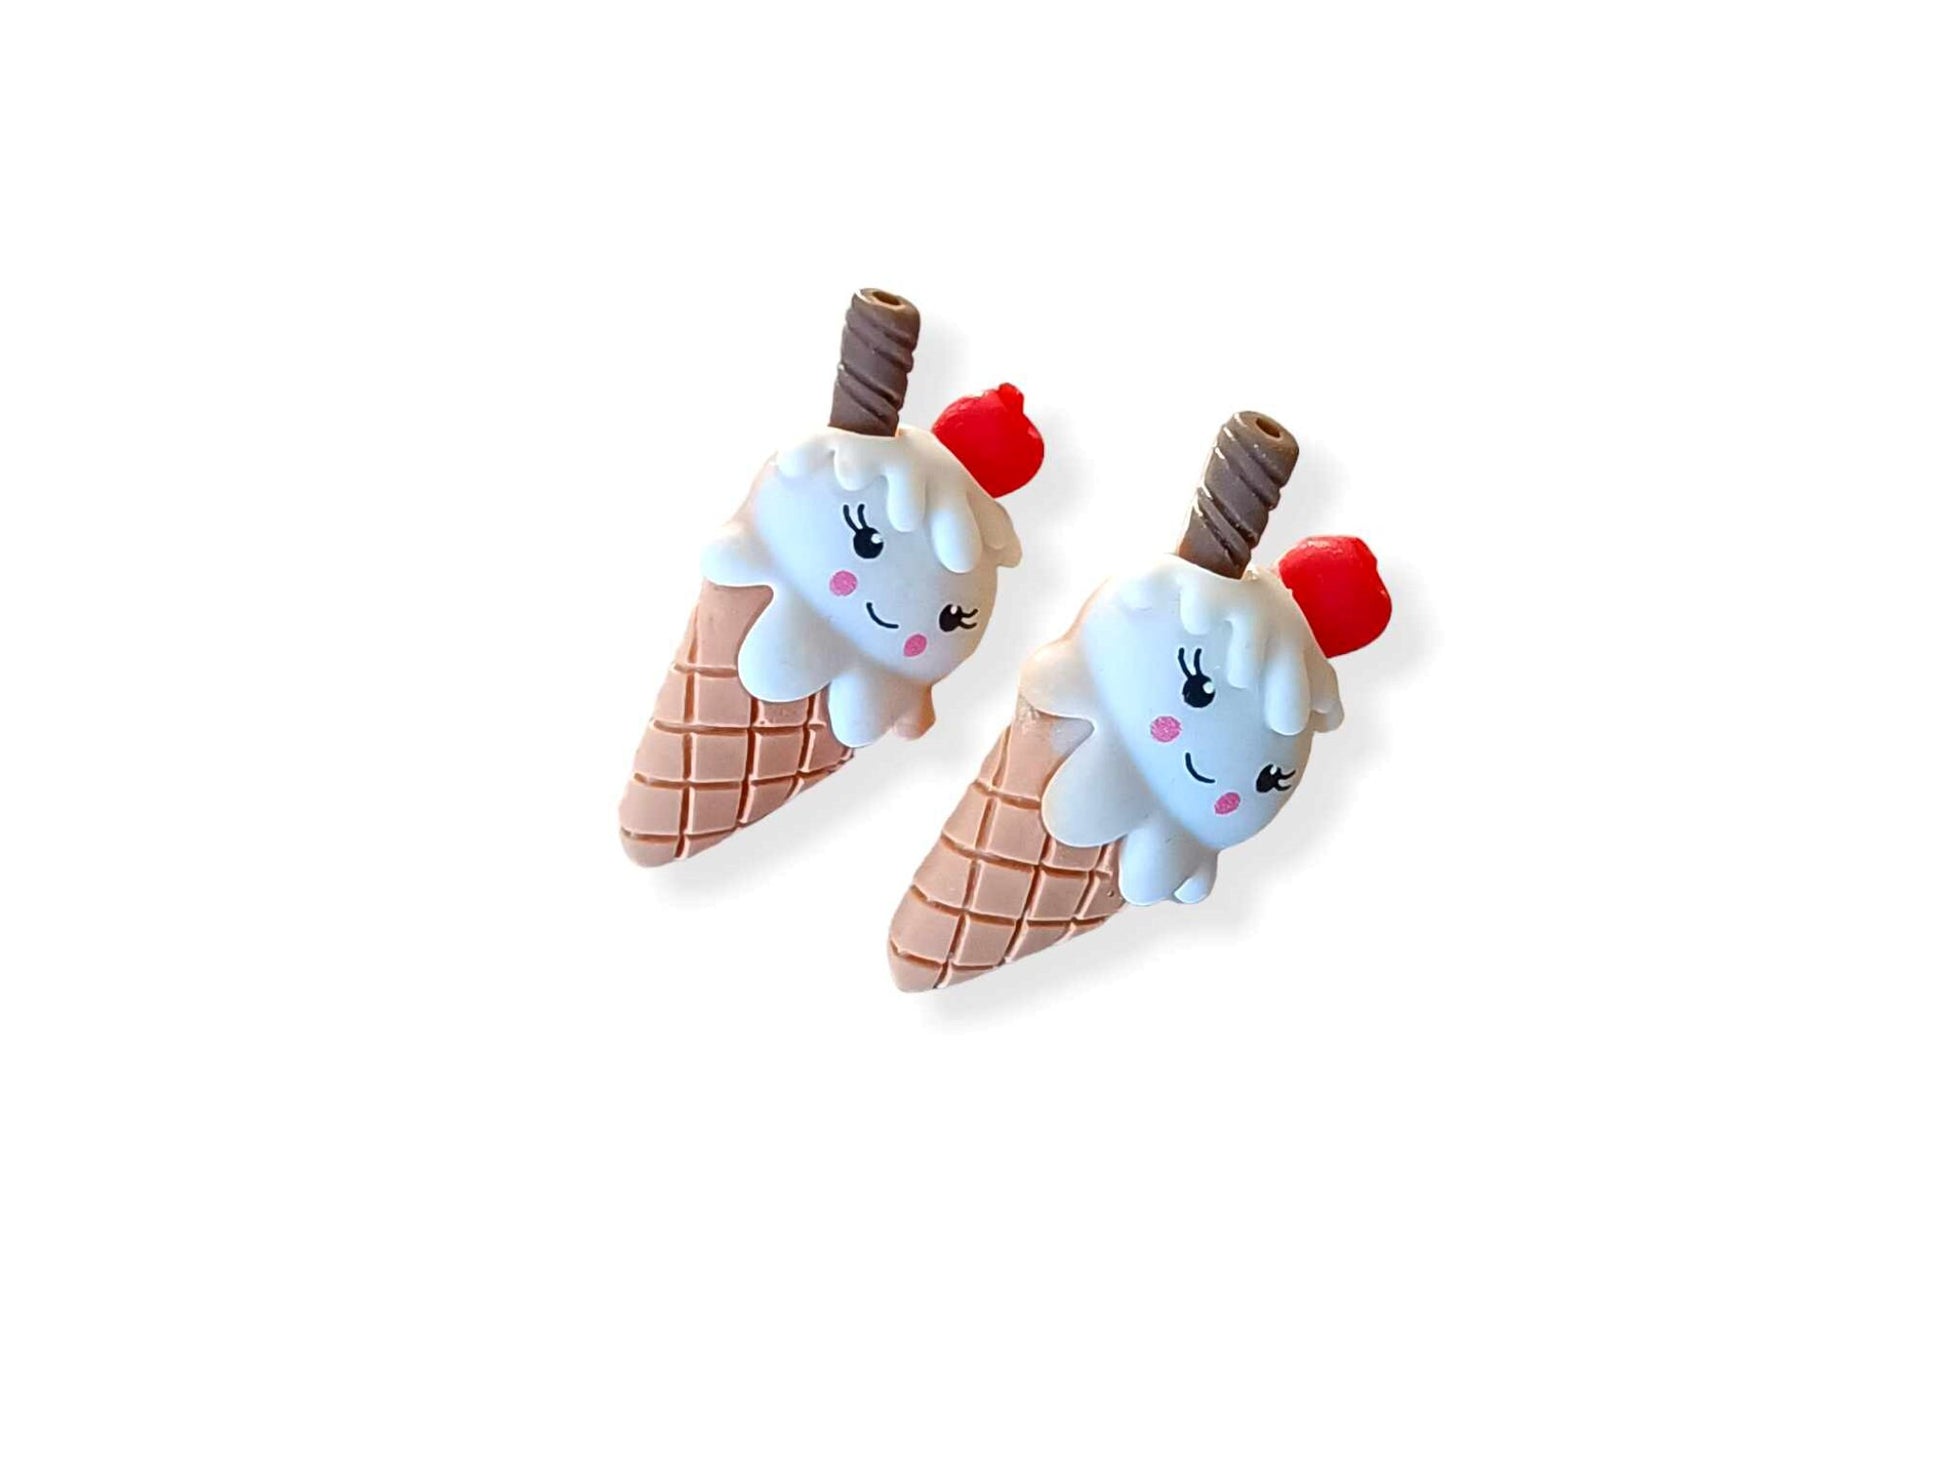 Sweet Treats for Your Ears - Ice Cream Cone Resin Earrings!